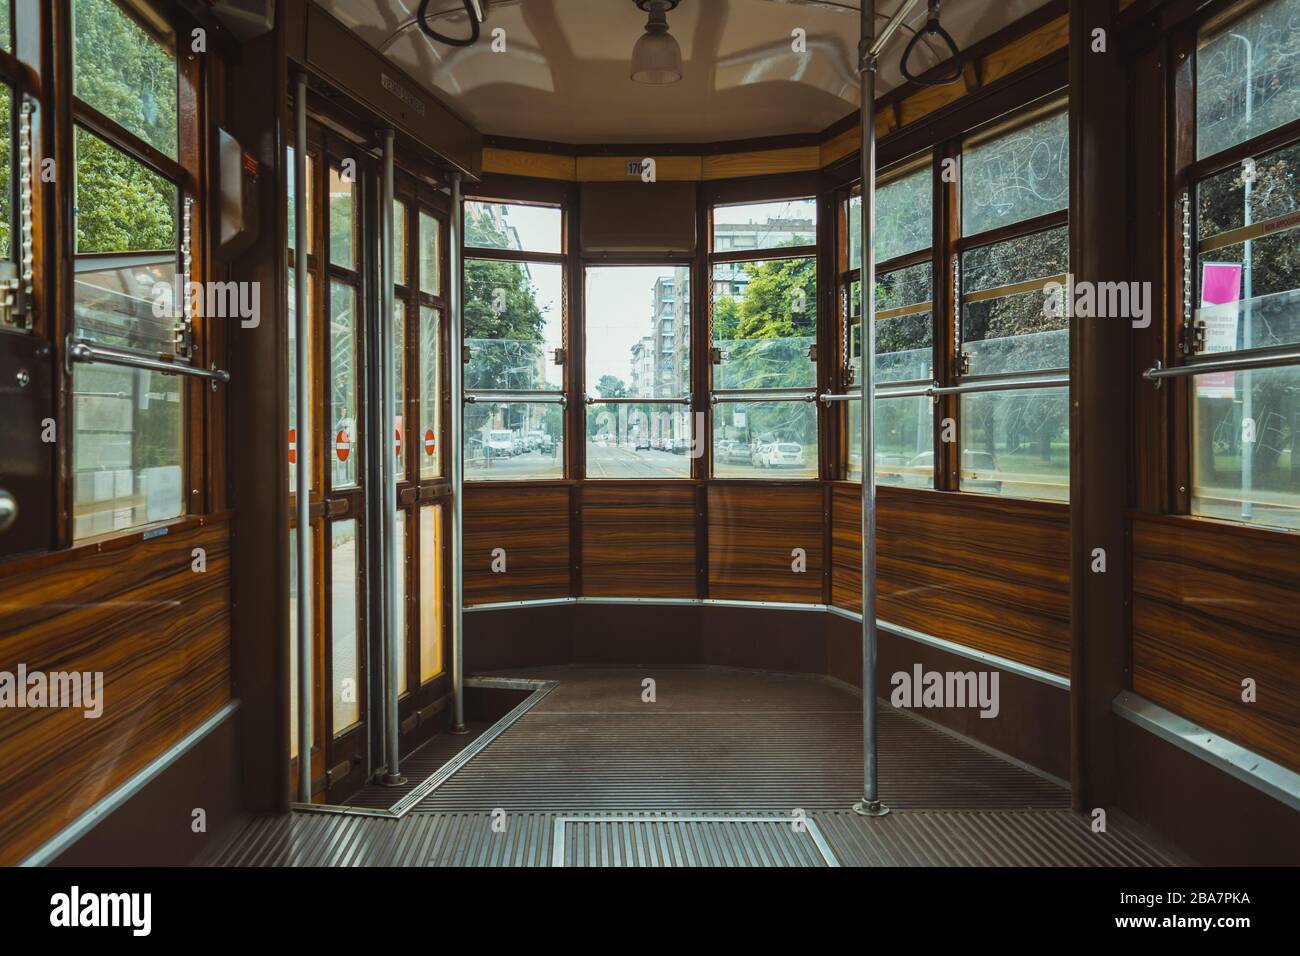 Empty old fashioned tram interior in Milan, Italy Stock Photo